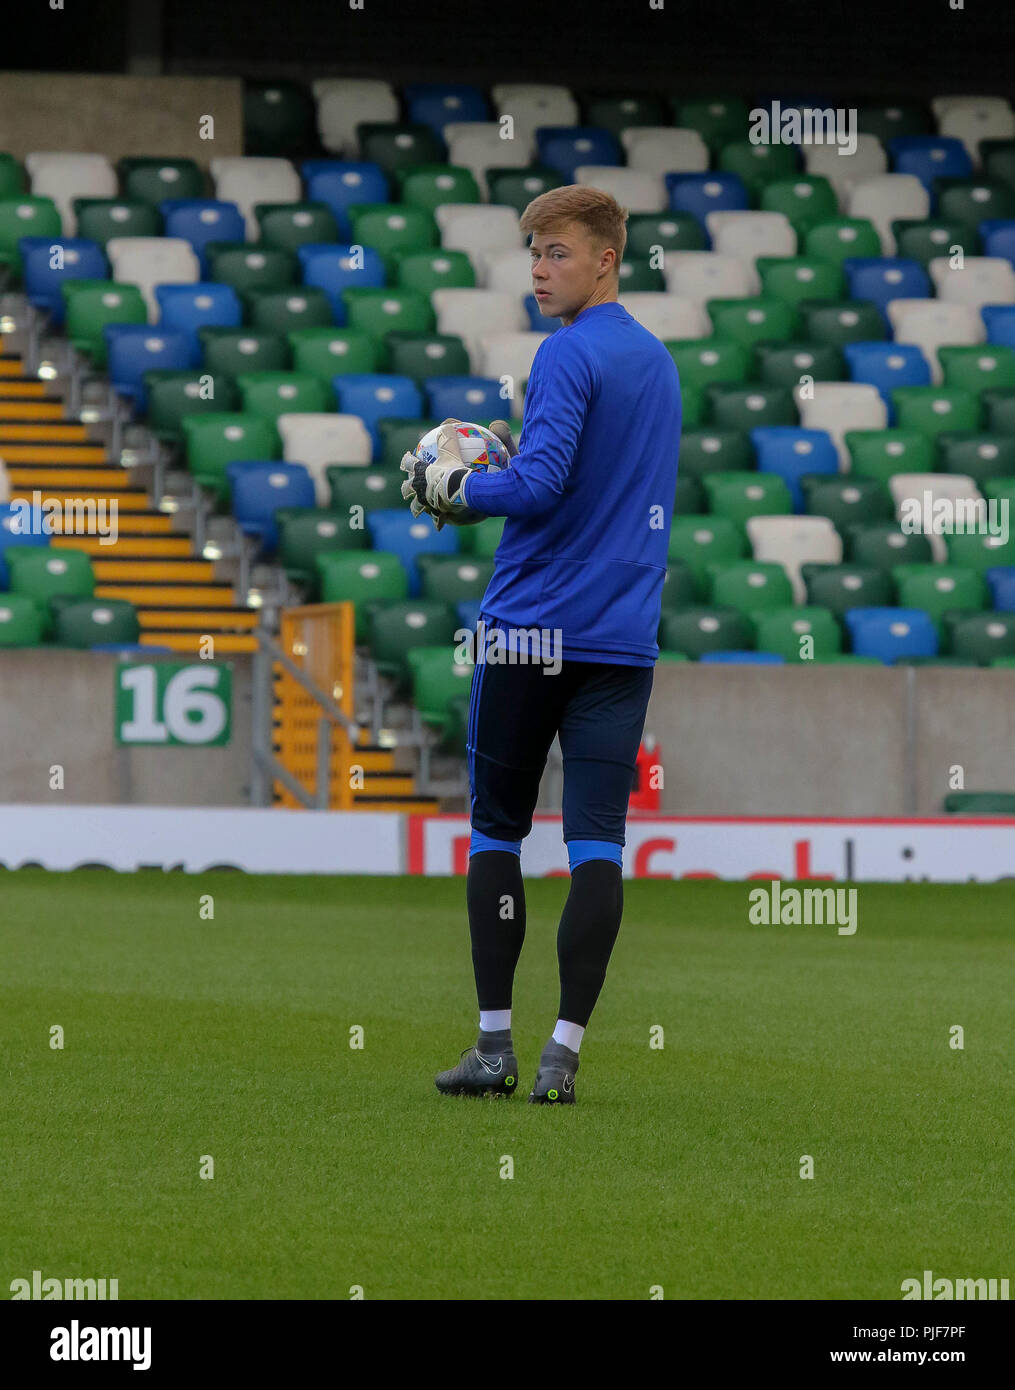 Windsor Park, Belfast, Northern Ireland. 07 September 2018. Northern Ireland in training this morning at Windsor Park before tomorrow night's UEFA Nations League at the stadium against Bosnia & Herzegovina. Goalkeeper Bailey Peacock-Farrell at training. Credit: David Hunter/Alamy Live News. Stock Photo